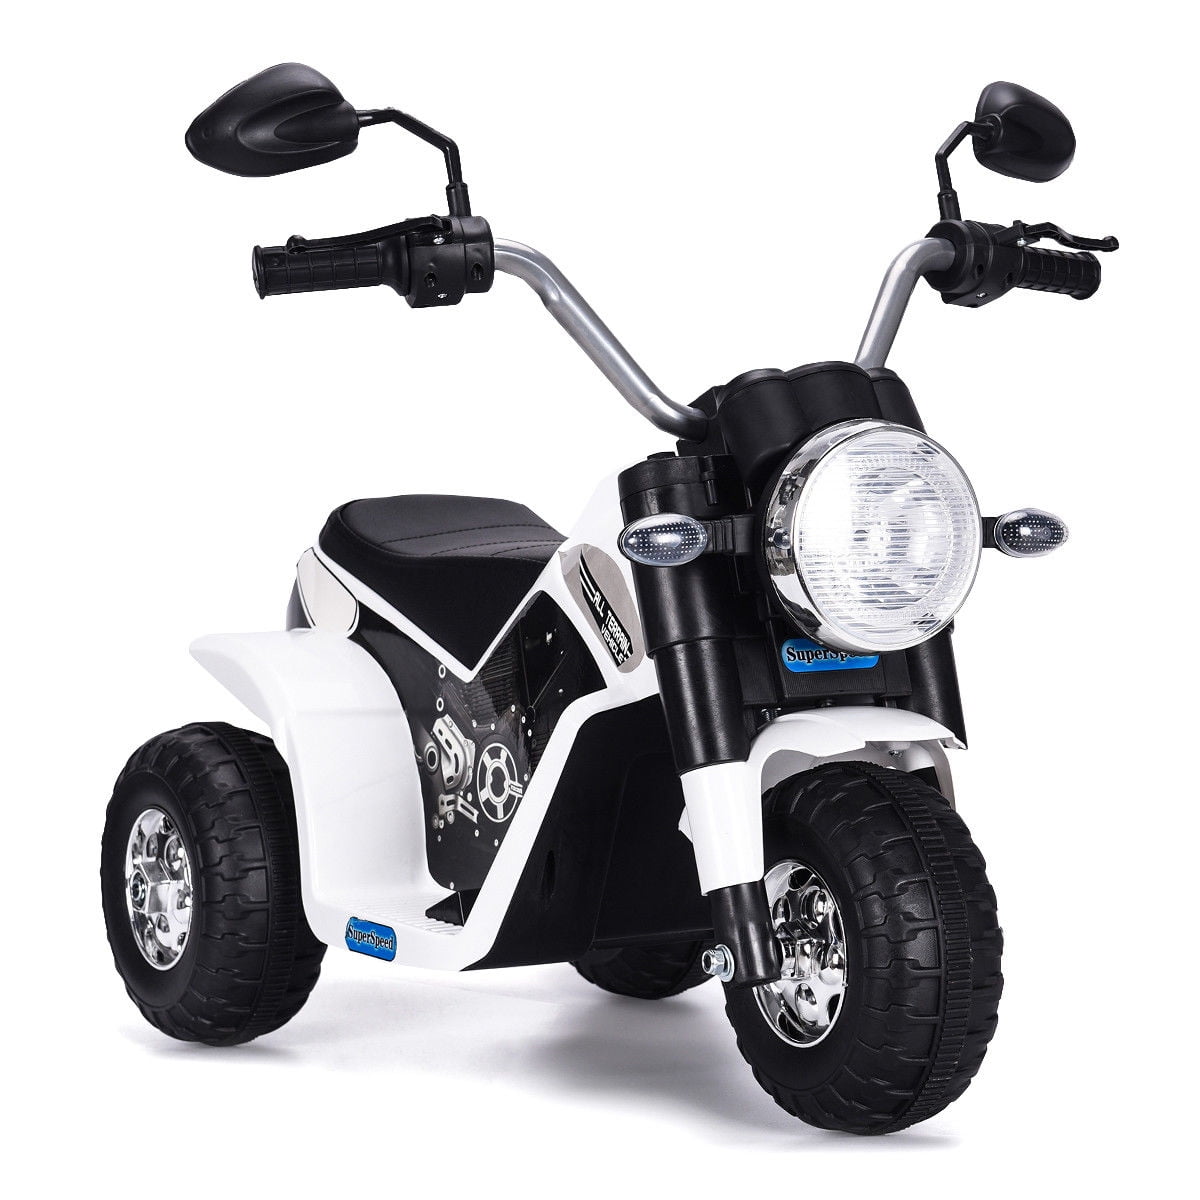 Veryke Kids Electric Battery-Powered Ride-On Motorcycle Dirt Bike Toy for Kids, 3 Wheeler Gifts White Motorcycle for Children Child Boys